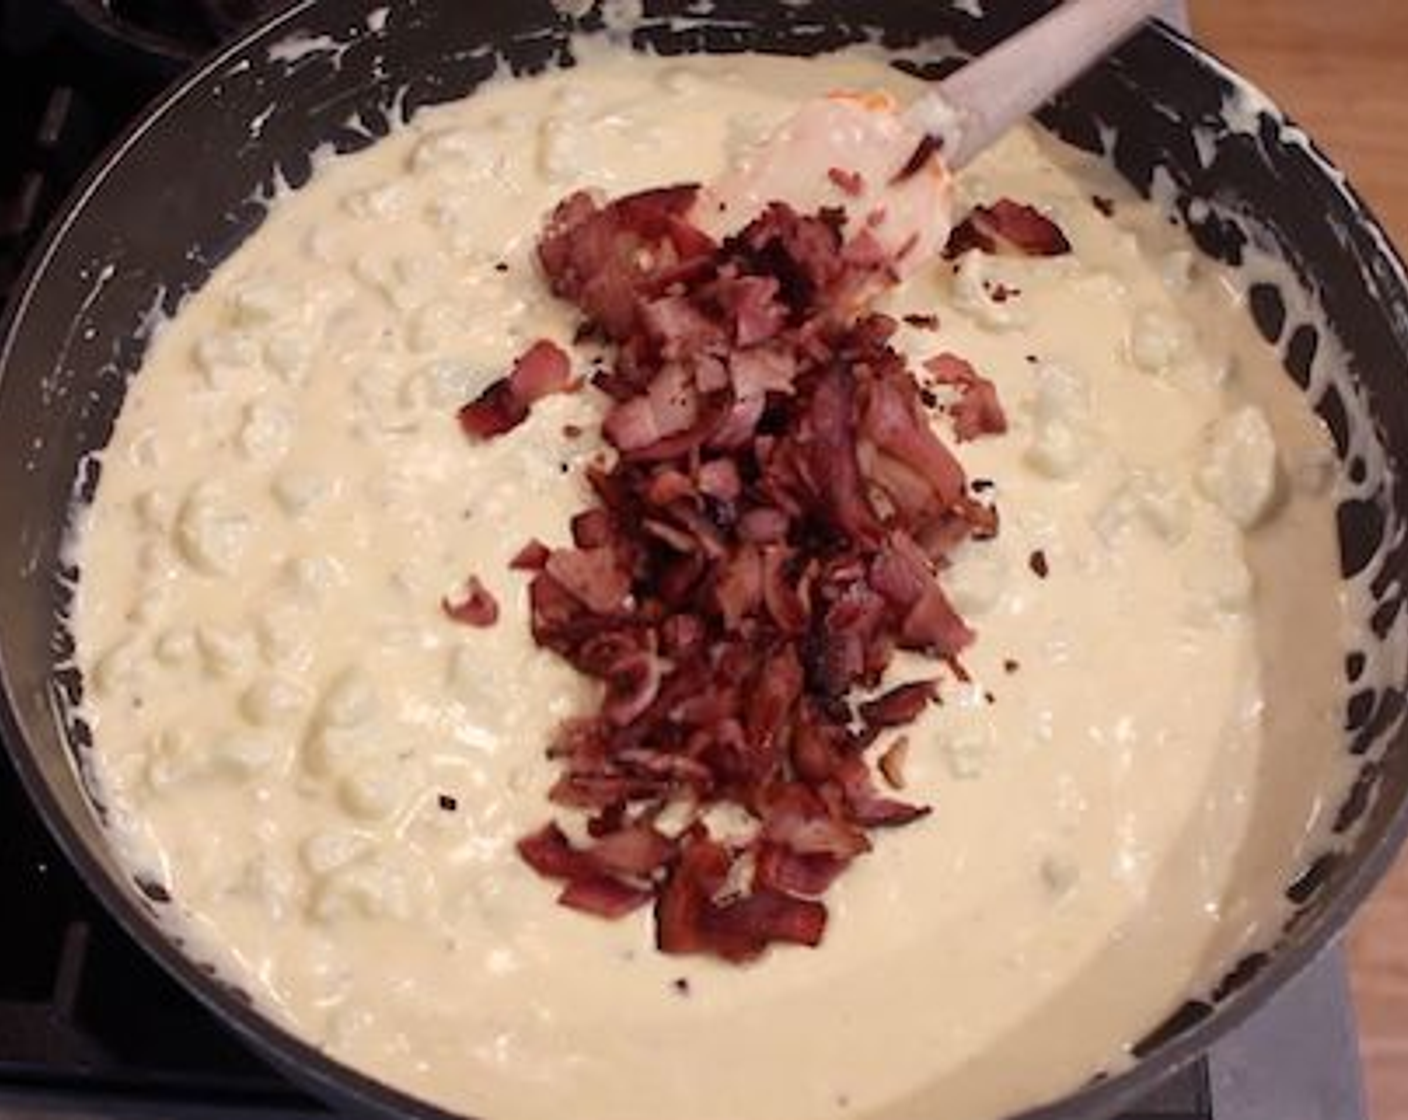 step 5 Once the mix has melted down and thickened slightly, drain all the excess water off the cooked cauliflower and add it to the cheese sauce. Mix it together well, then add in the bacon pieces, and again mix everything well for 1-2 minutes.